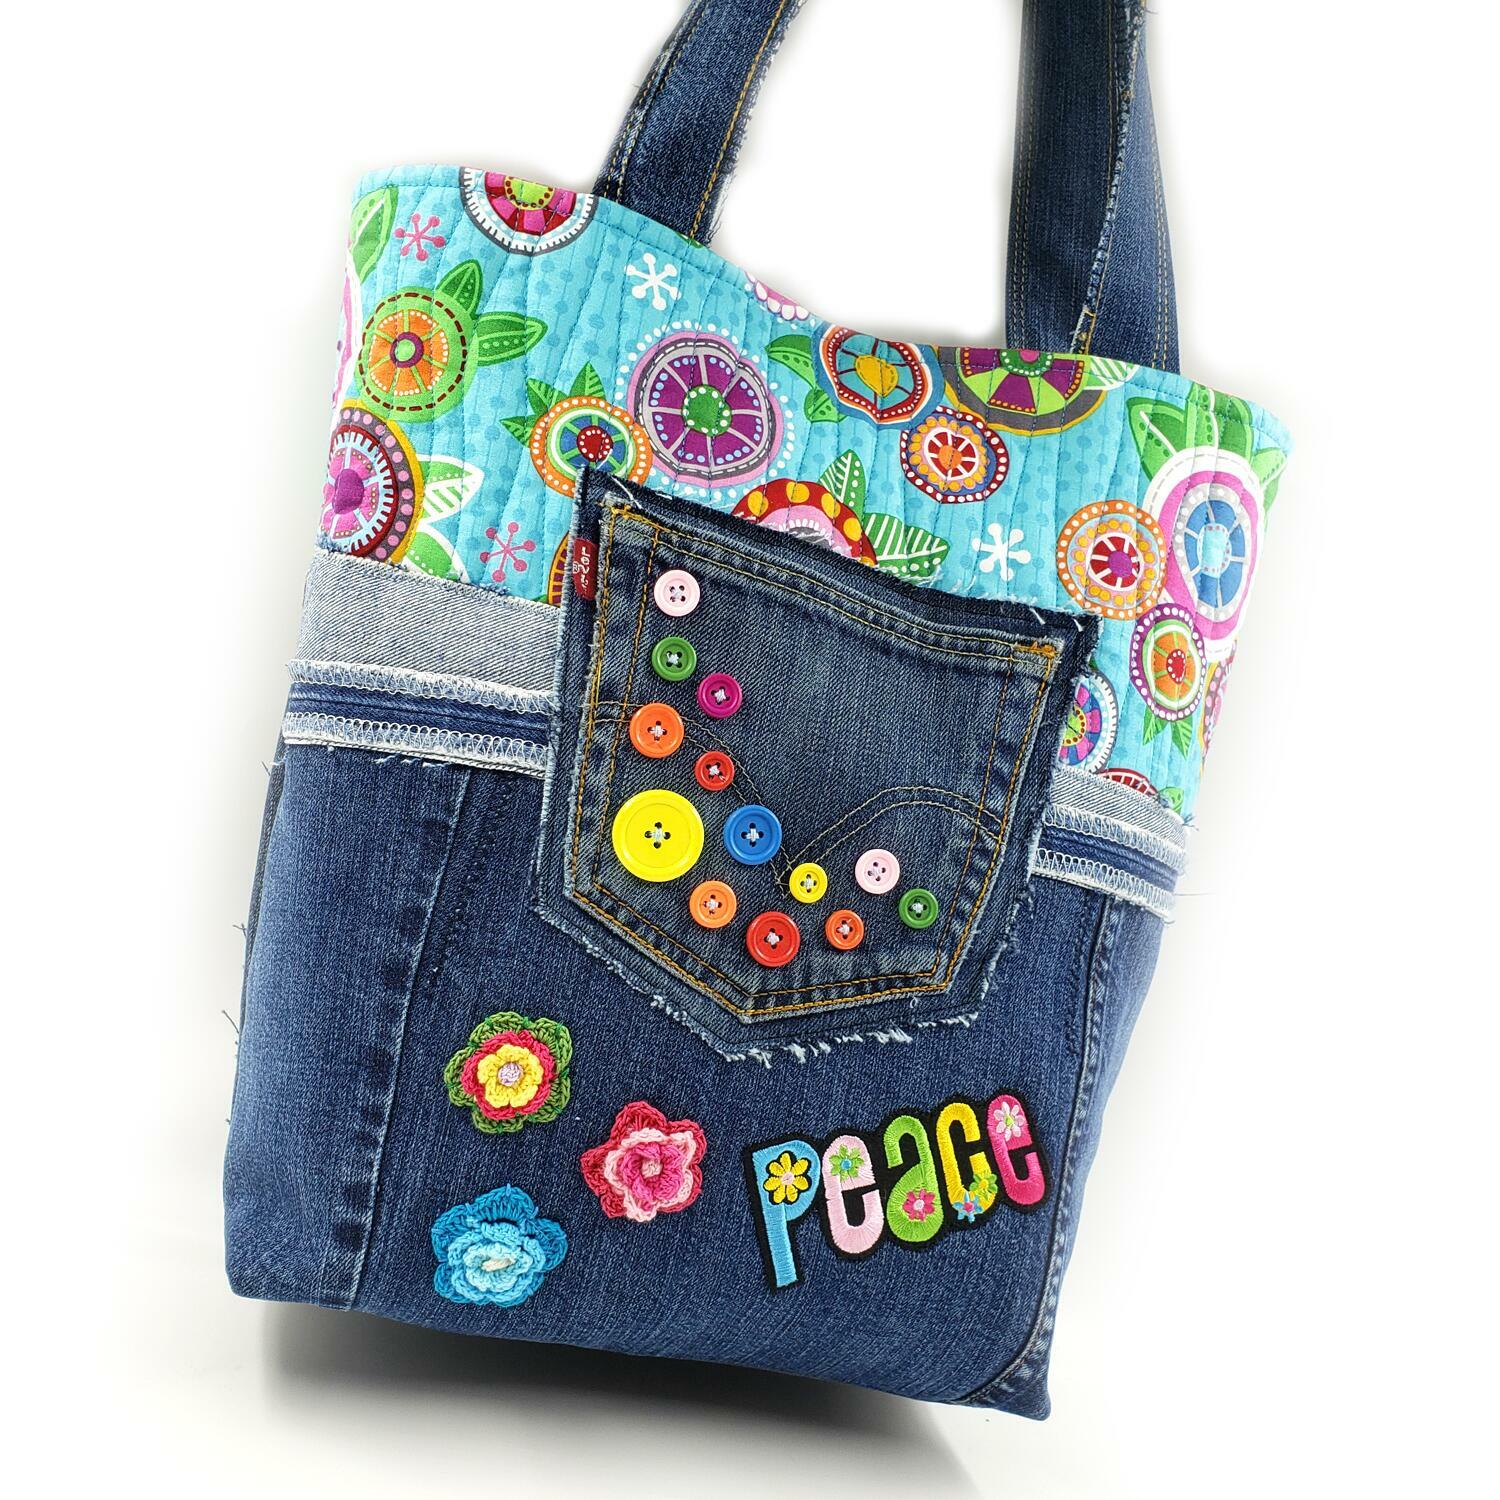 Fuzzbags - unique, bright and funky tote bags made in the UK by Rache